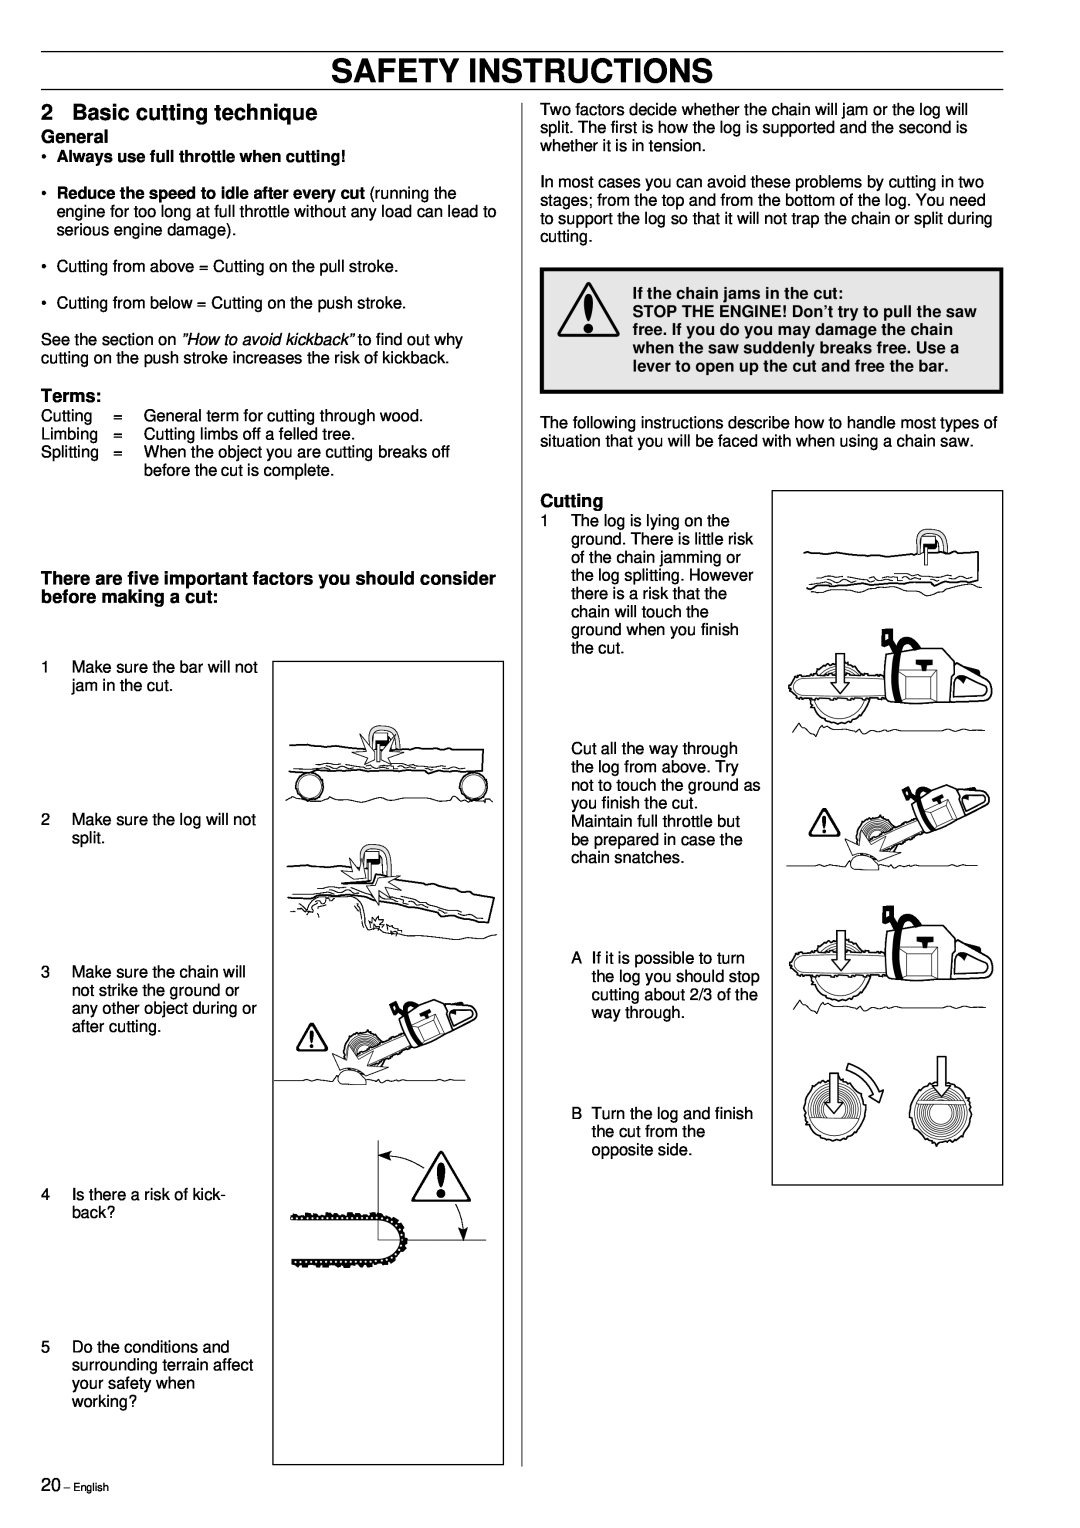 Husqvarna 355 manual Basic cutting technique, General, Terms, Cutting, Safety Instructions 